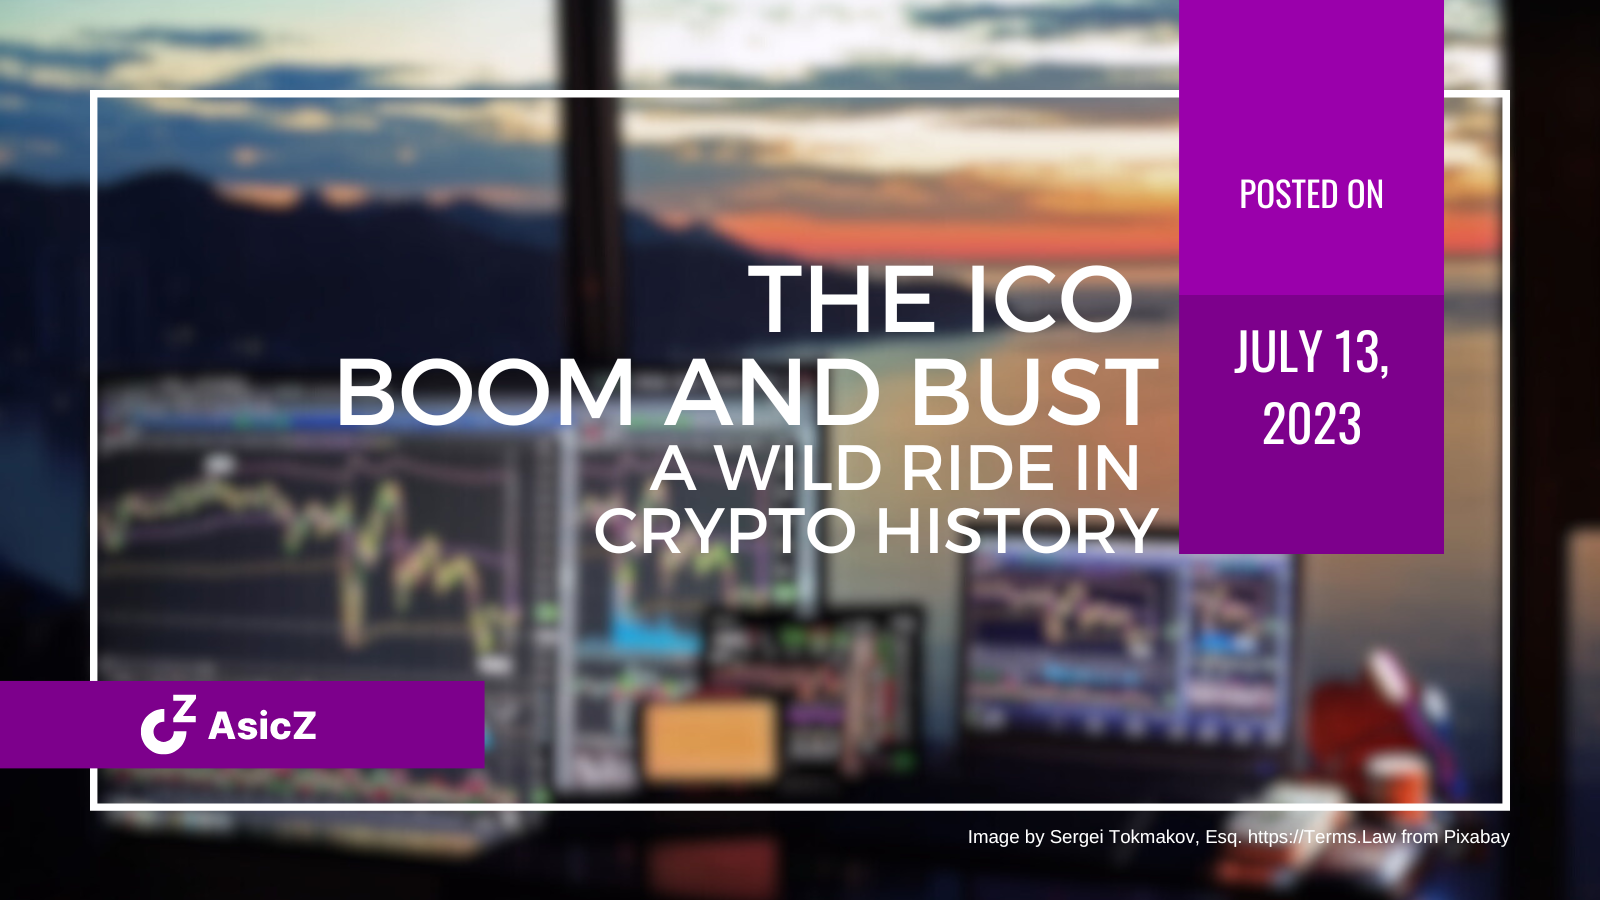 The ICO Boom and Bust – A Wild Ride in Crypto History